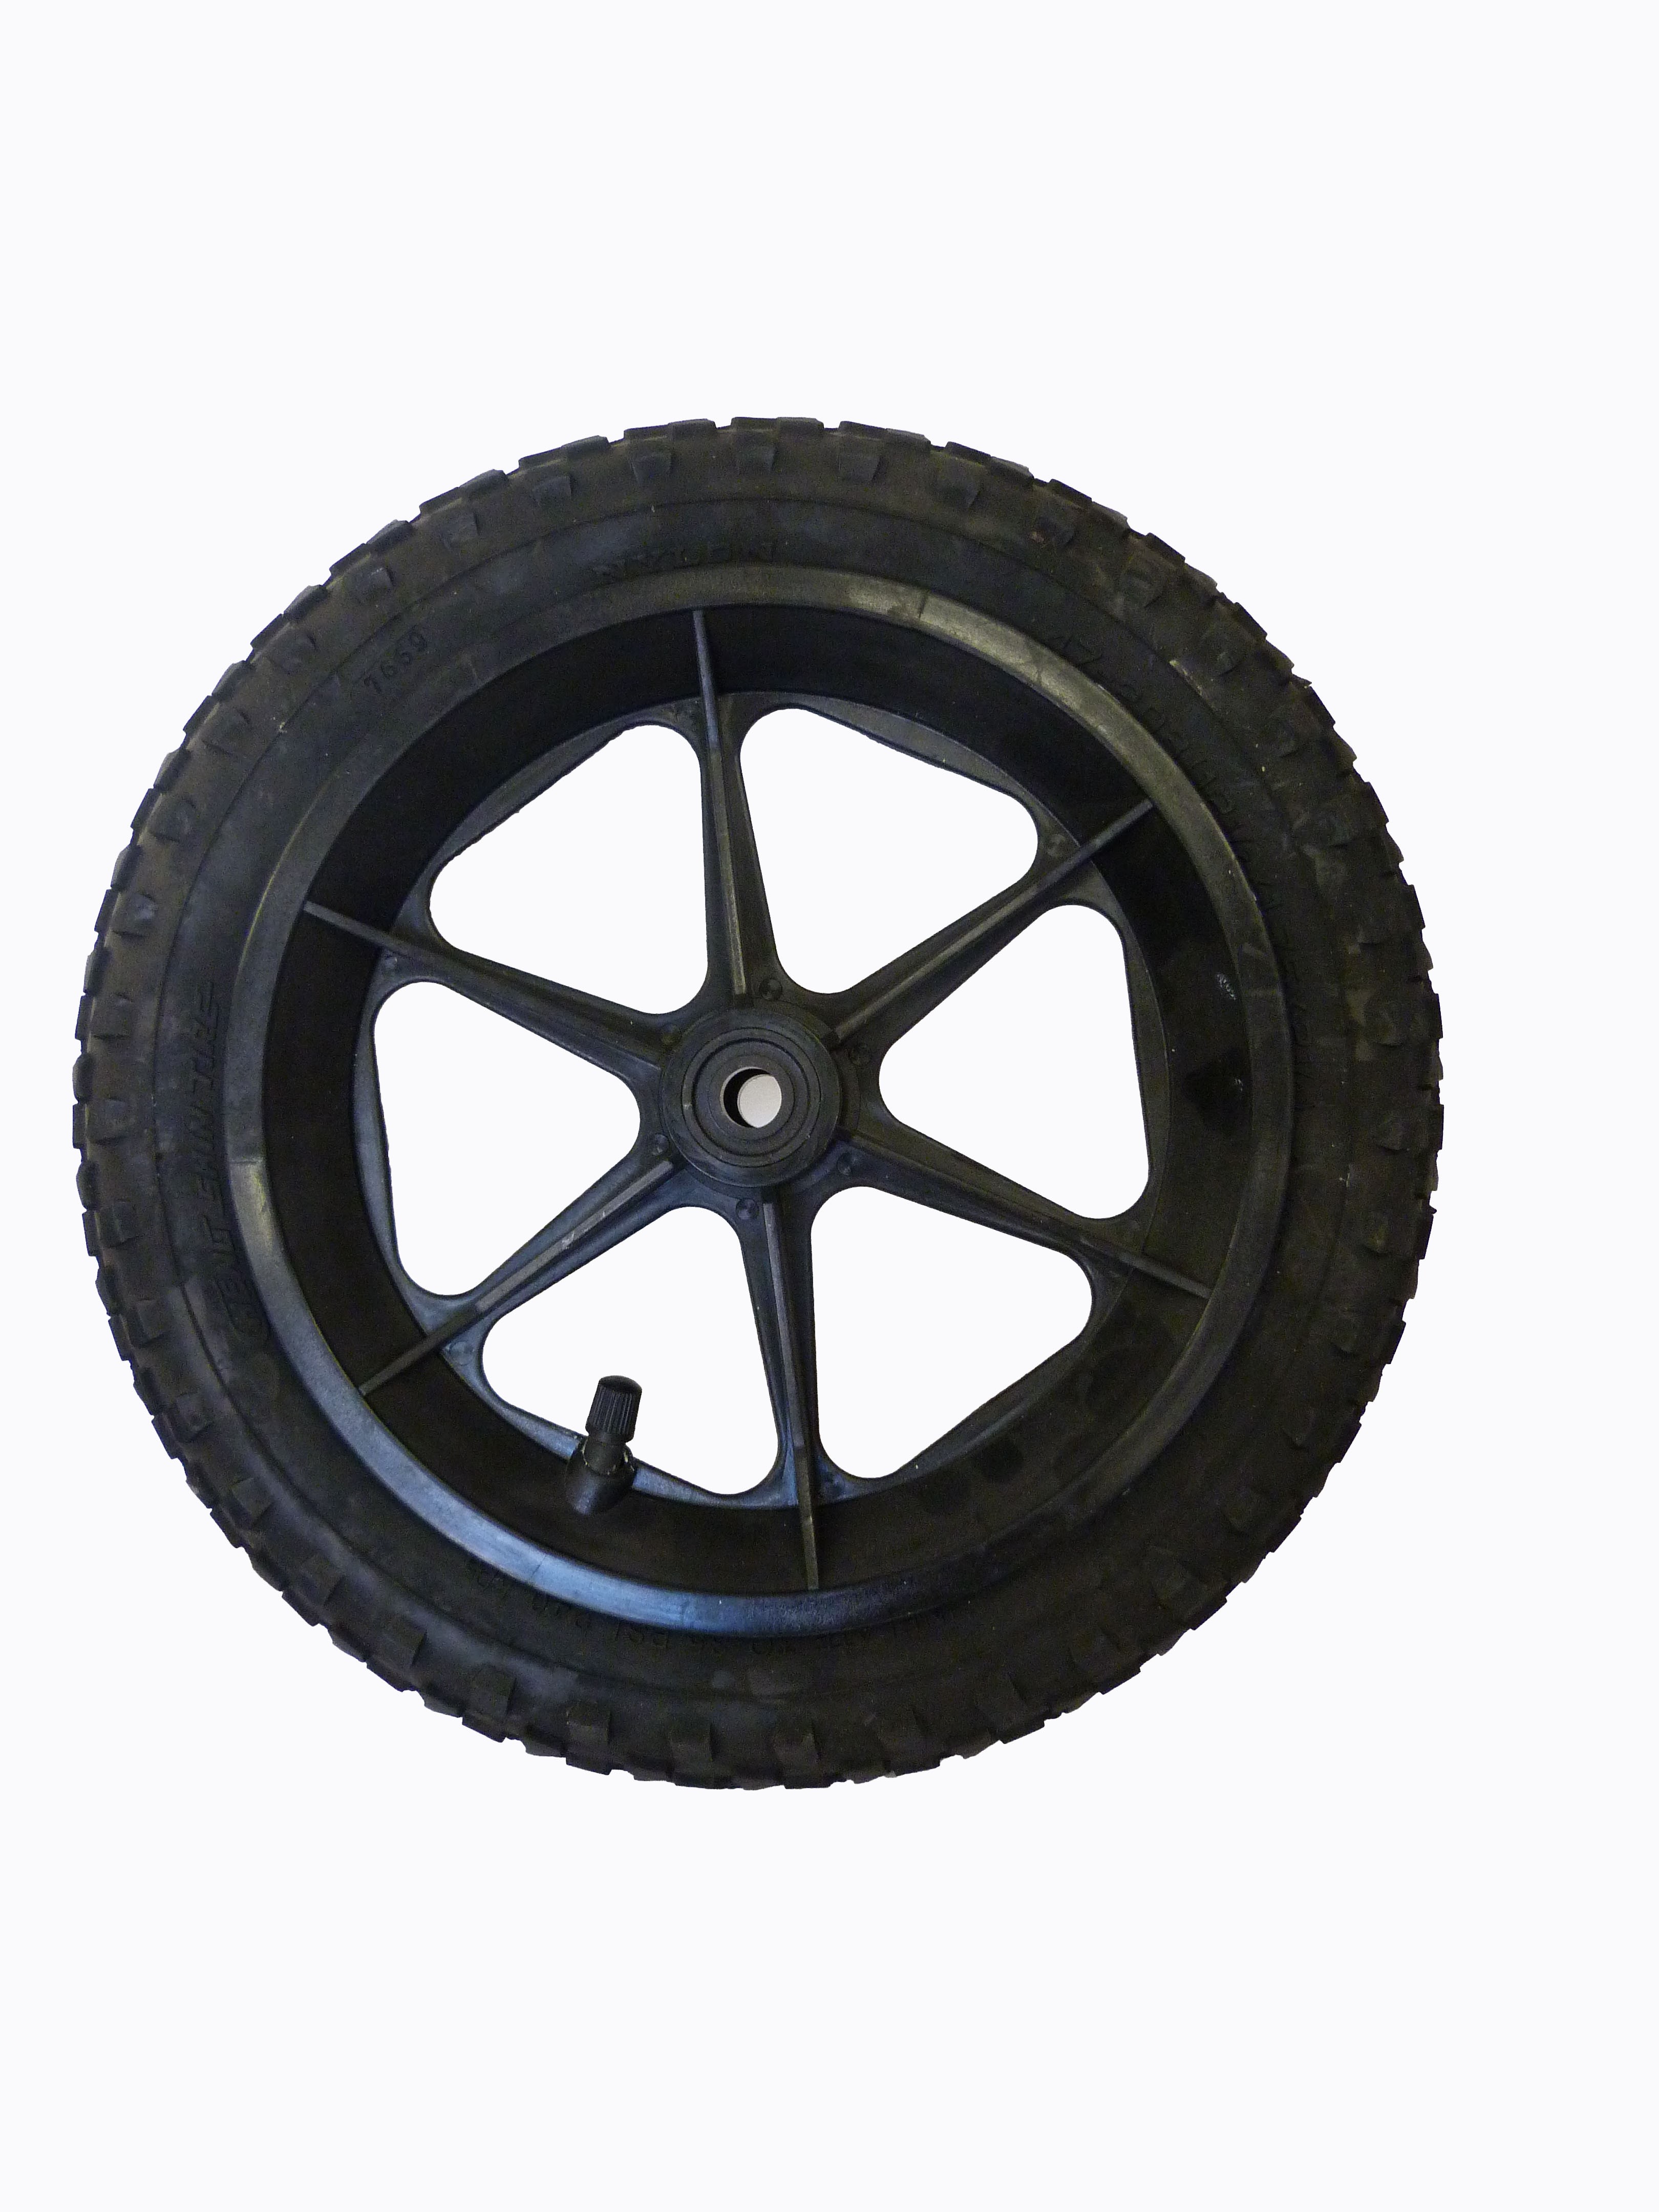 Spare wheel for boat-cart "Standard"